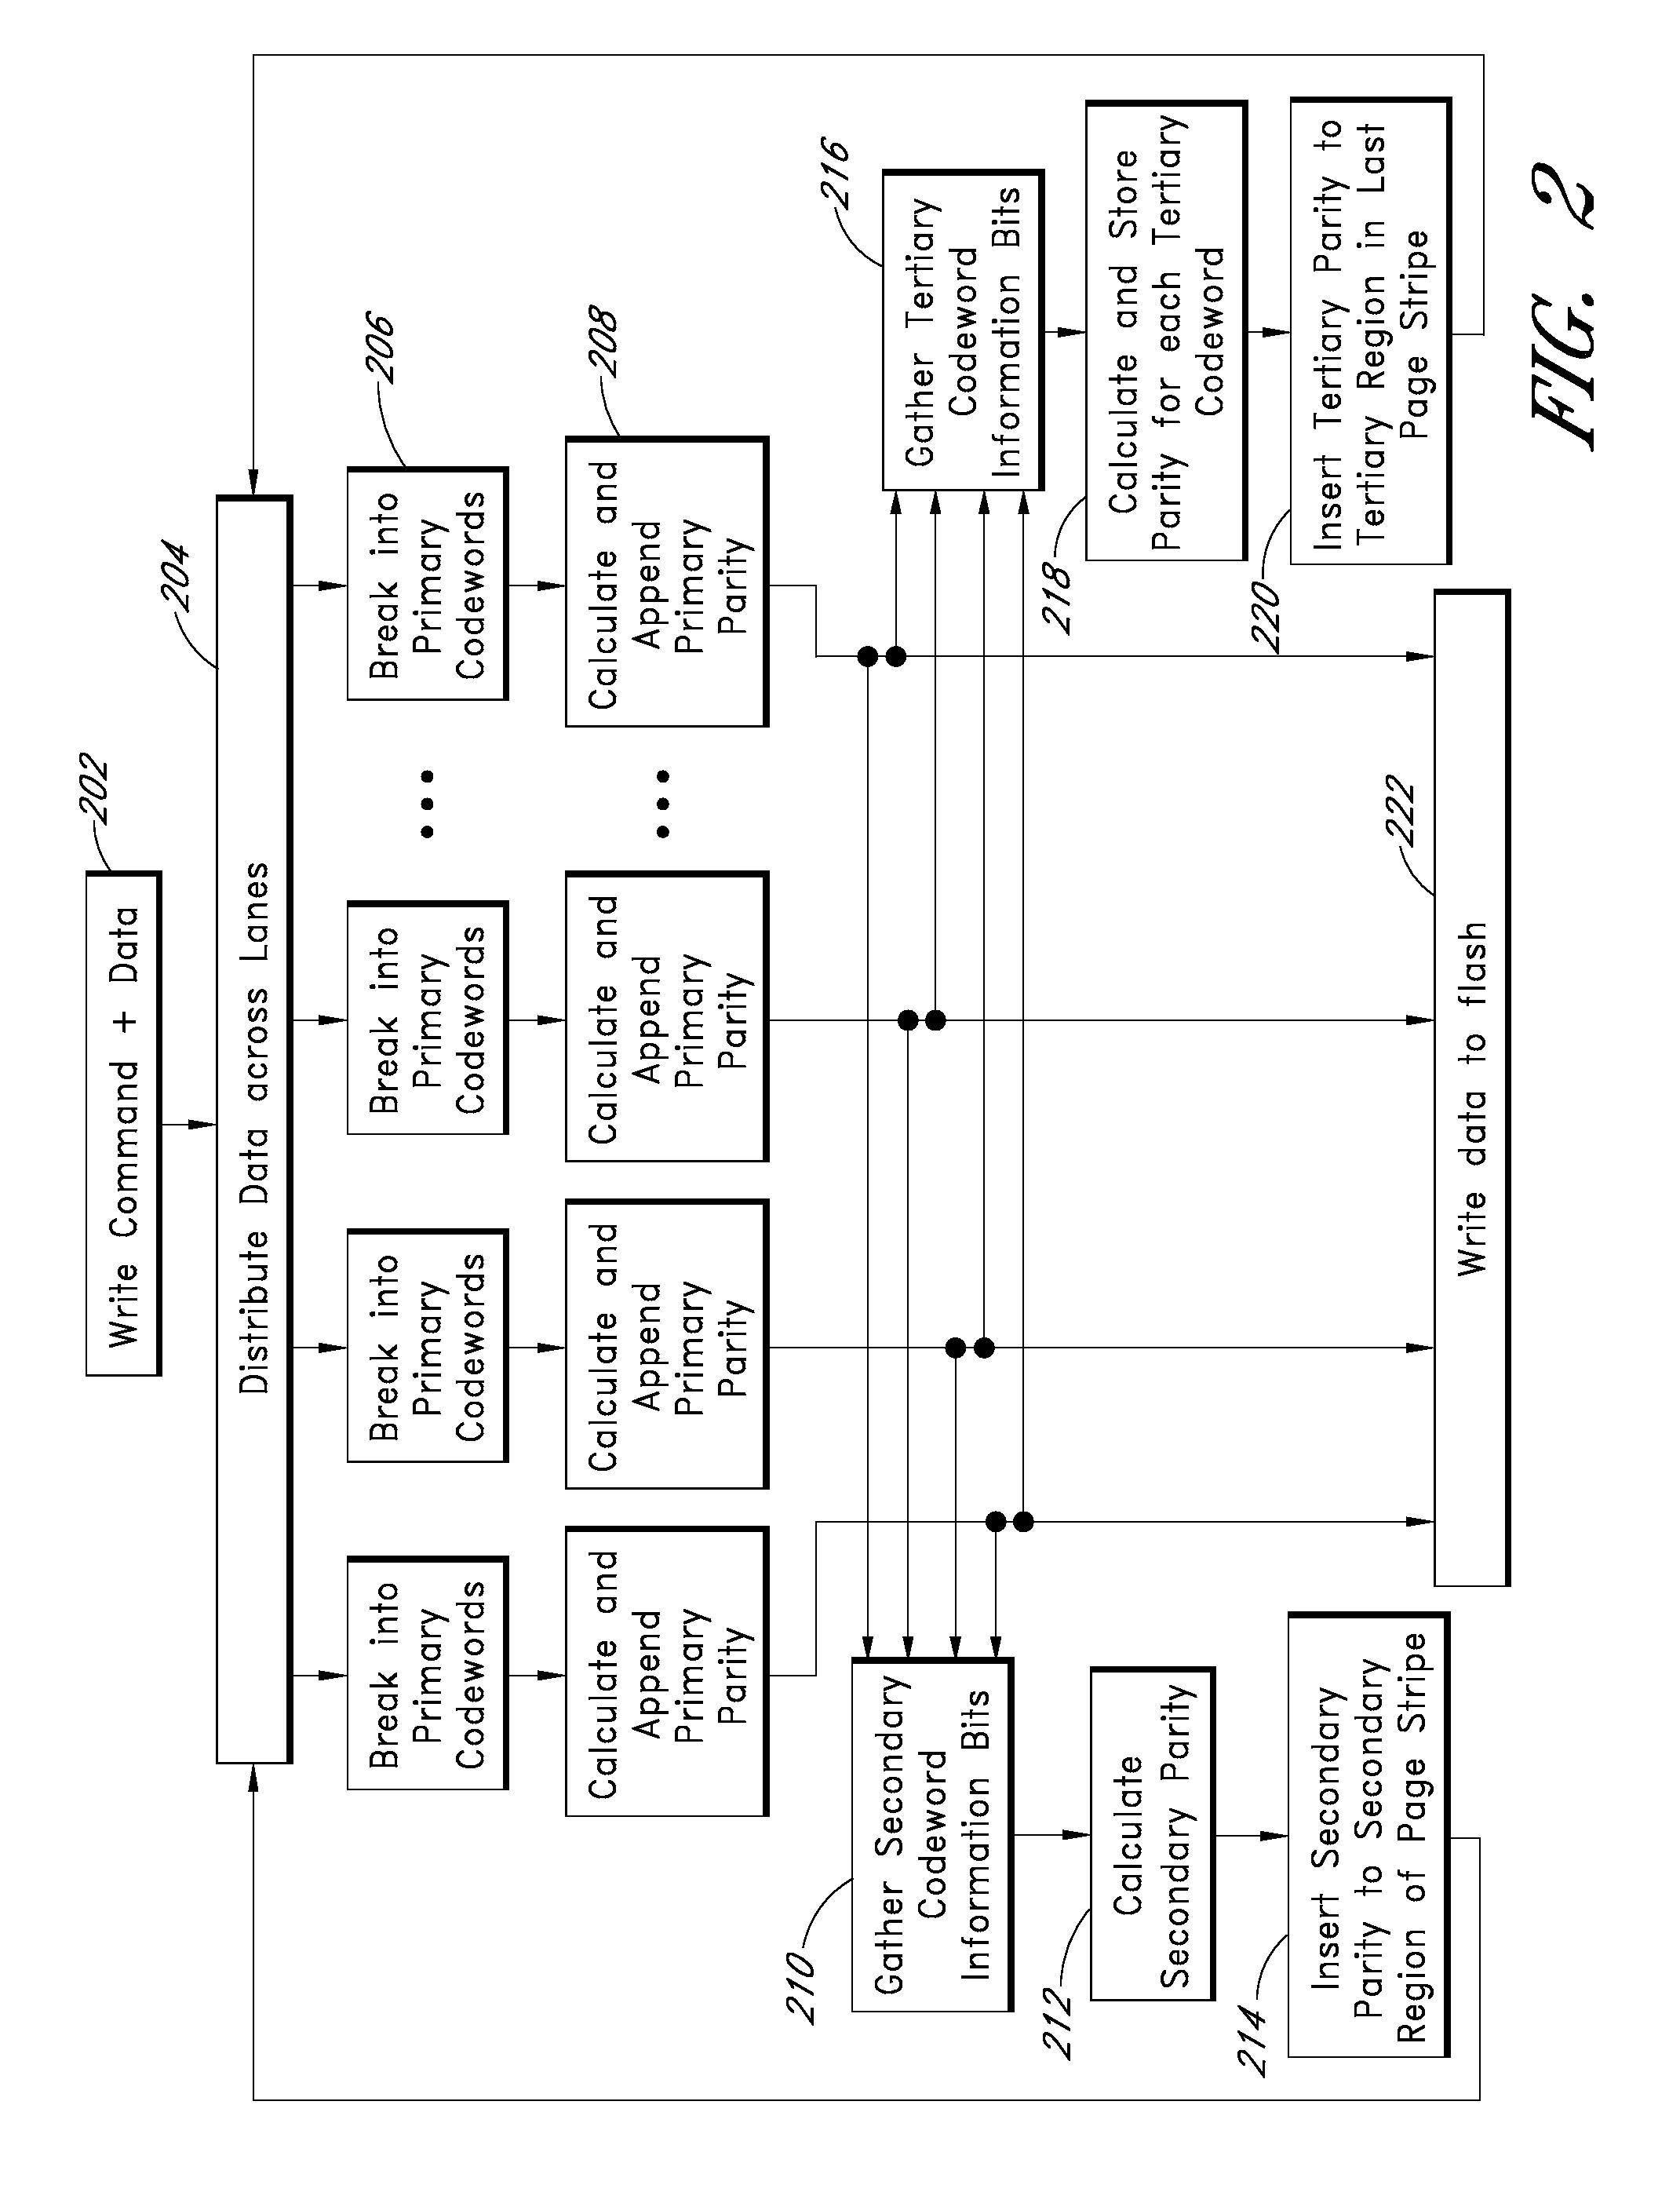 Systems and methods for redundantly storing error correction codes in a flash drive with secondary parity information spread out across each page of a group of pages